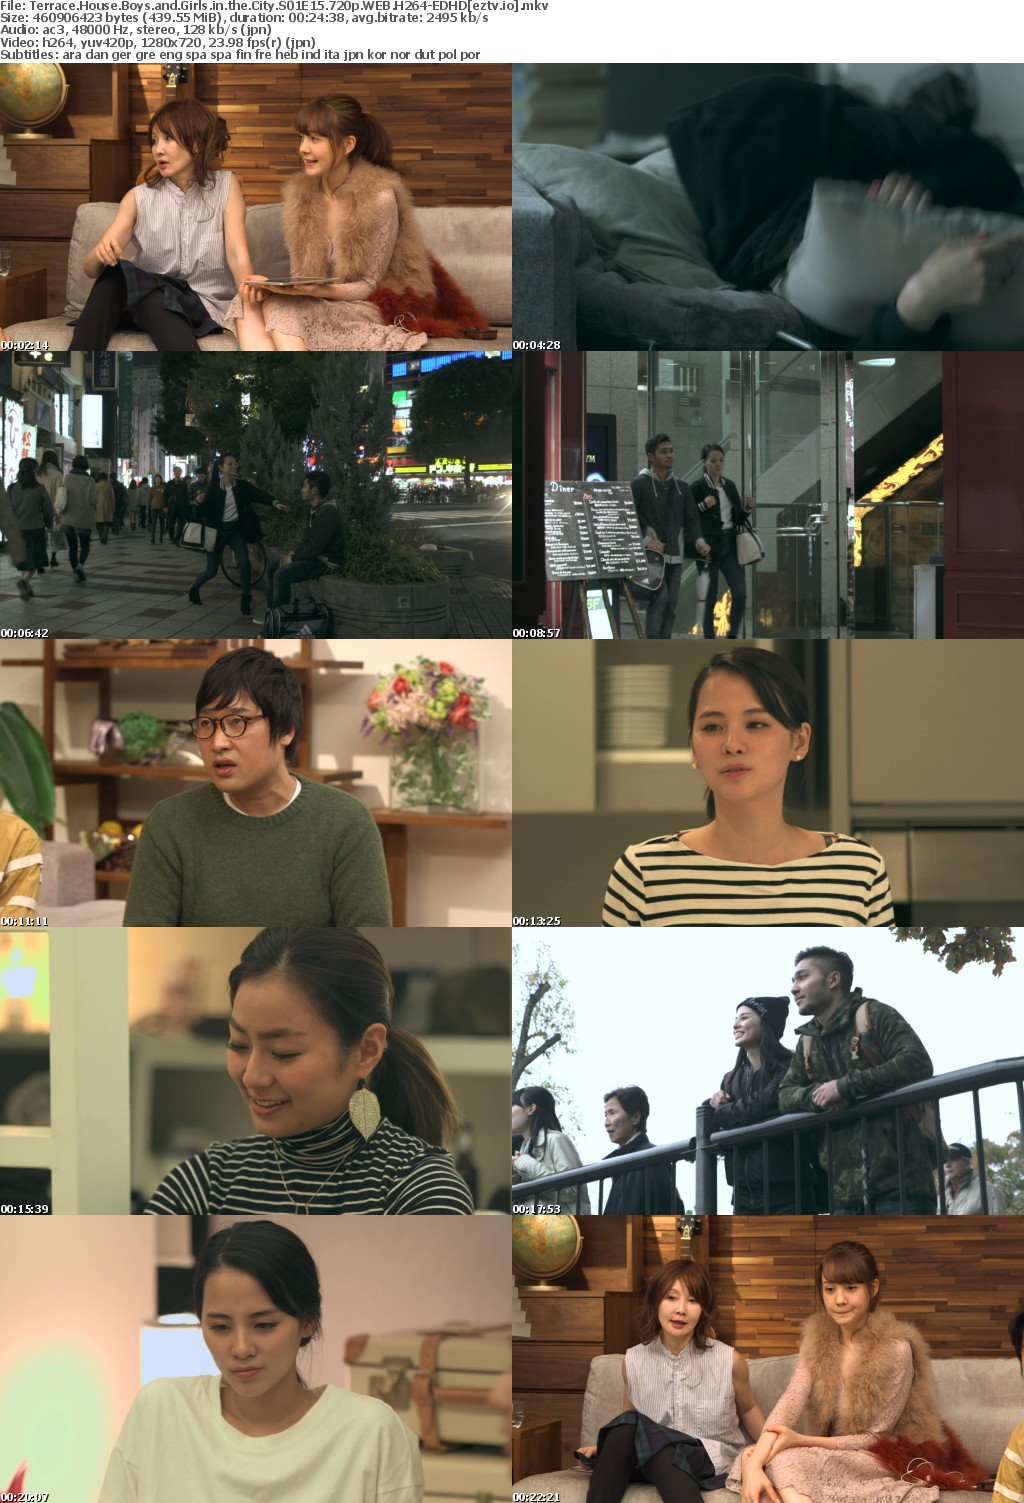 Terrace House Boys and Girls in the City S01E15 720p WEB H264-EDHD